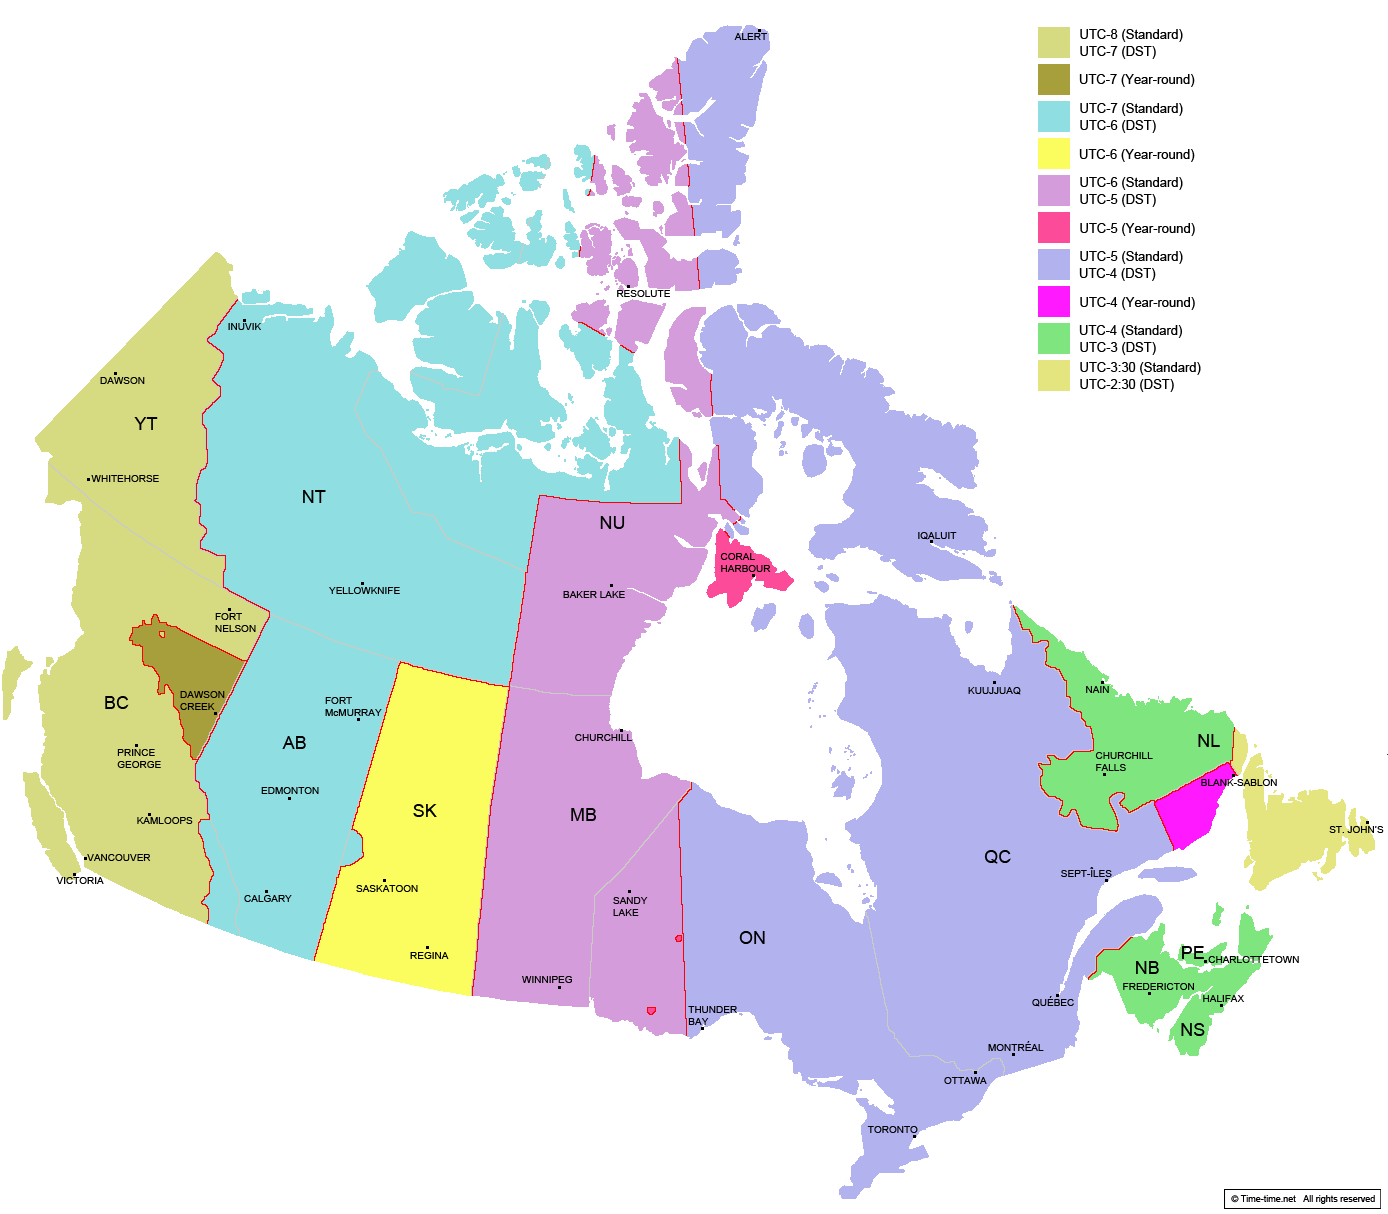 Canada Time Zone Map With Provinces With Cities With Clock